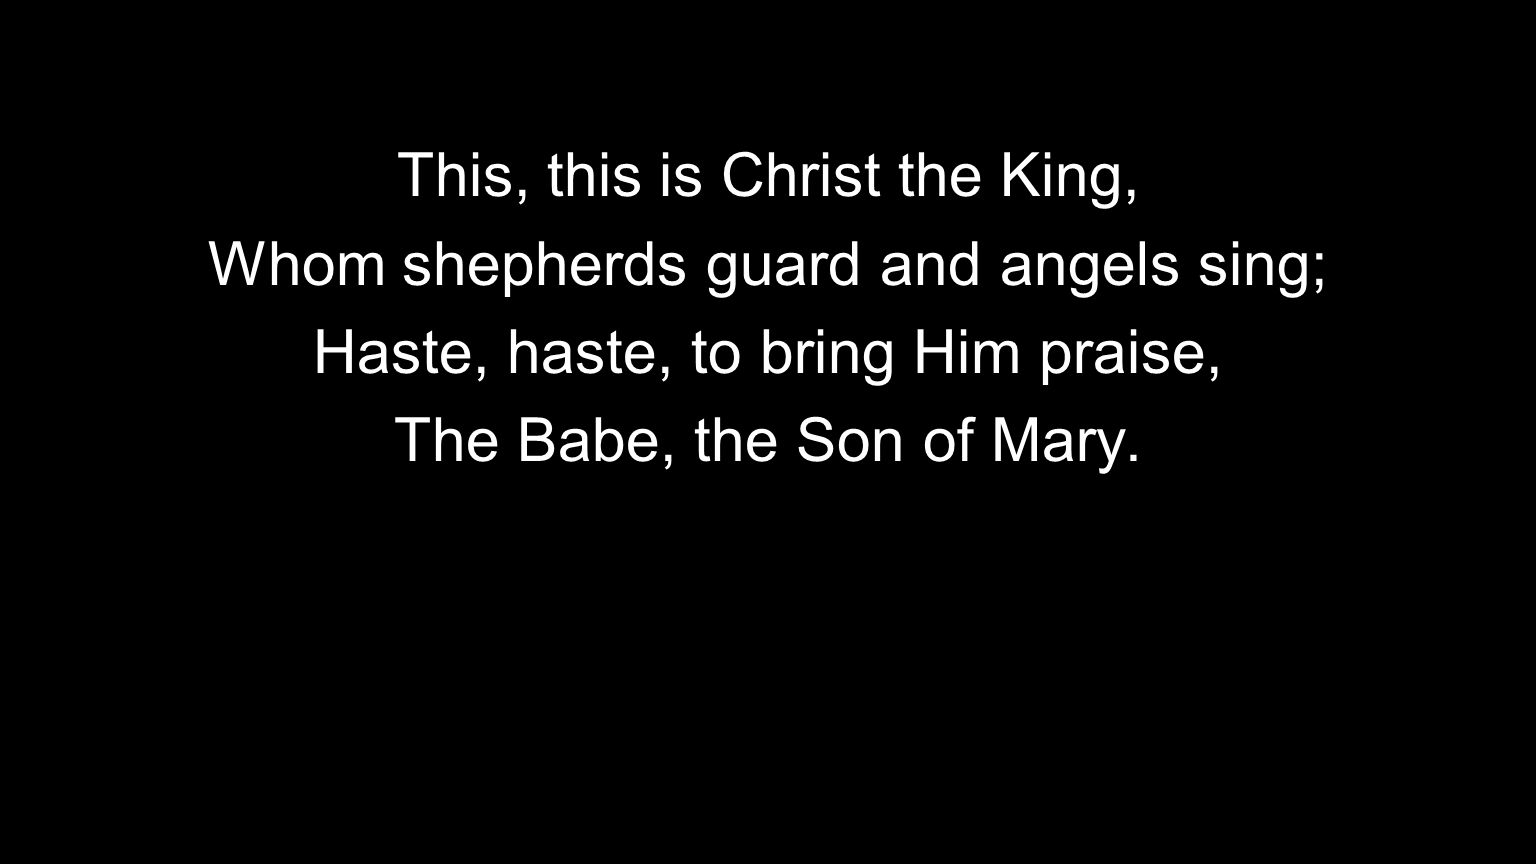 This, this is Christ the King, Whom shepherds guard and angels sing; Haste, haste, to bring Him praise, The Babe, the Son of Mary.